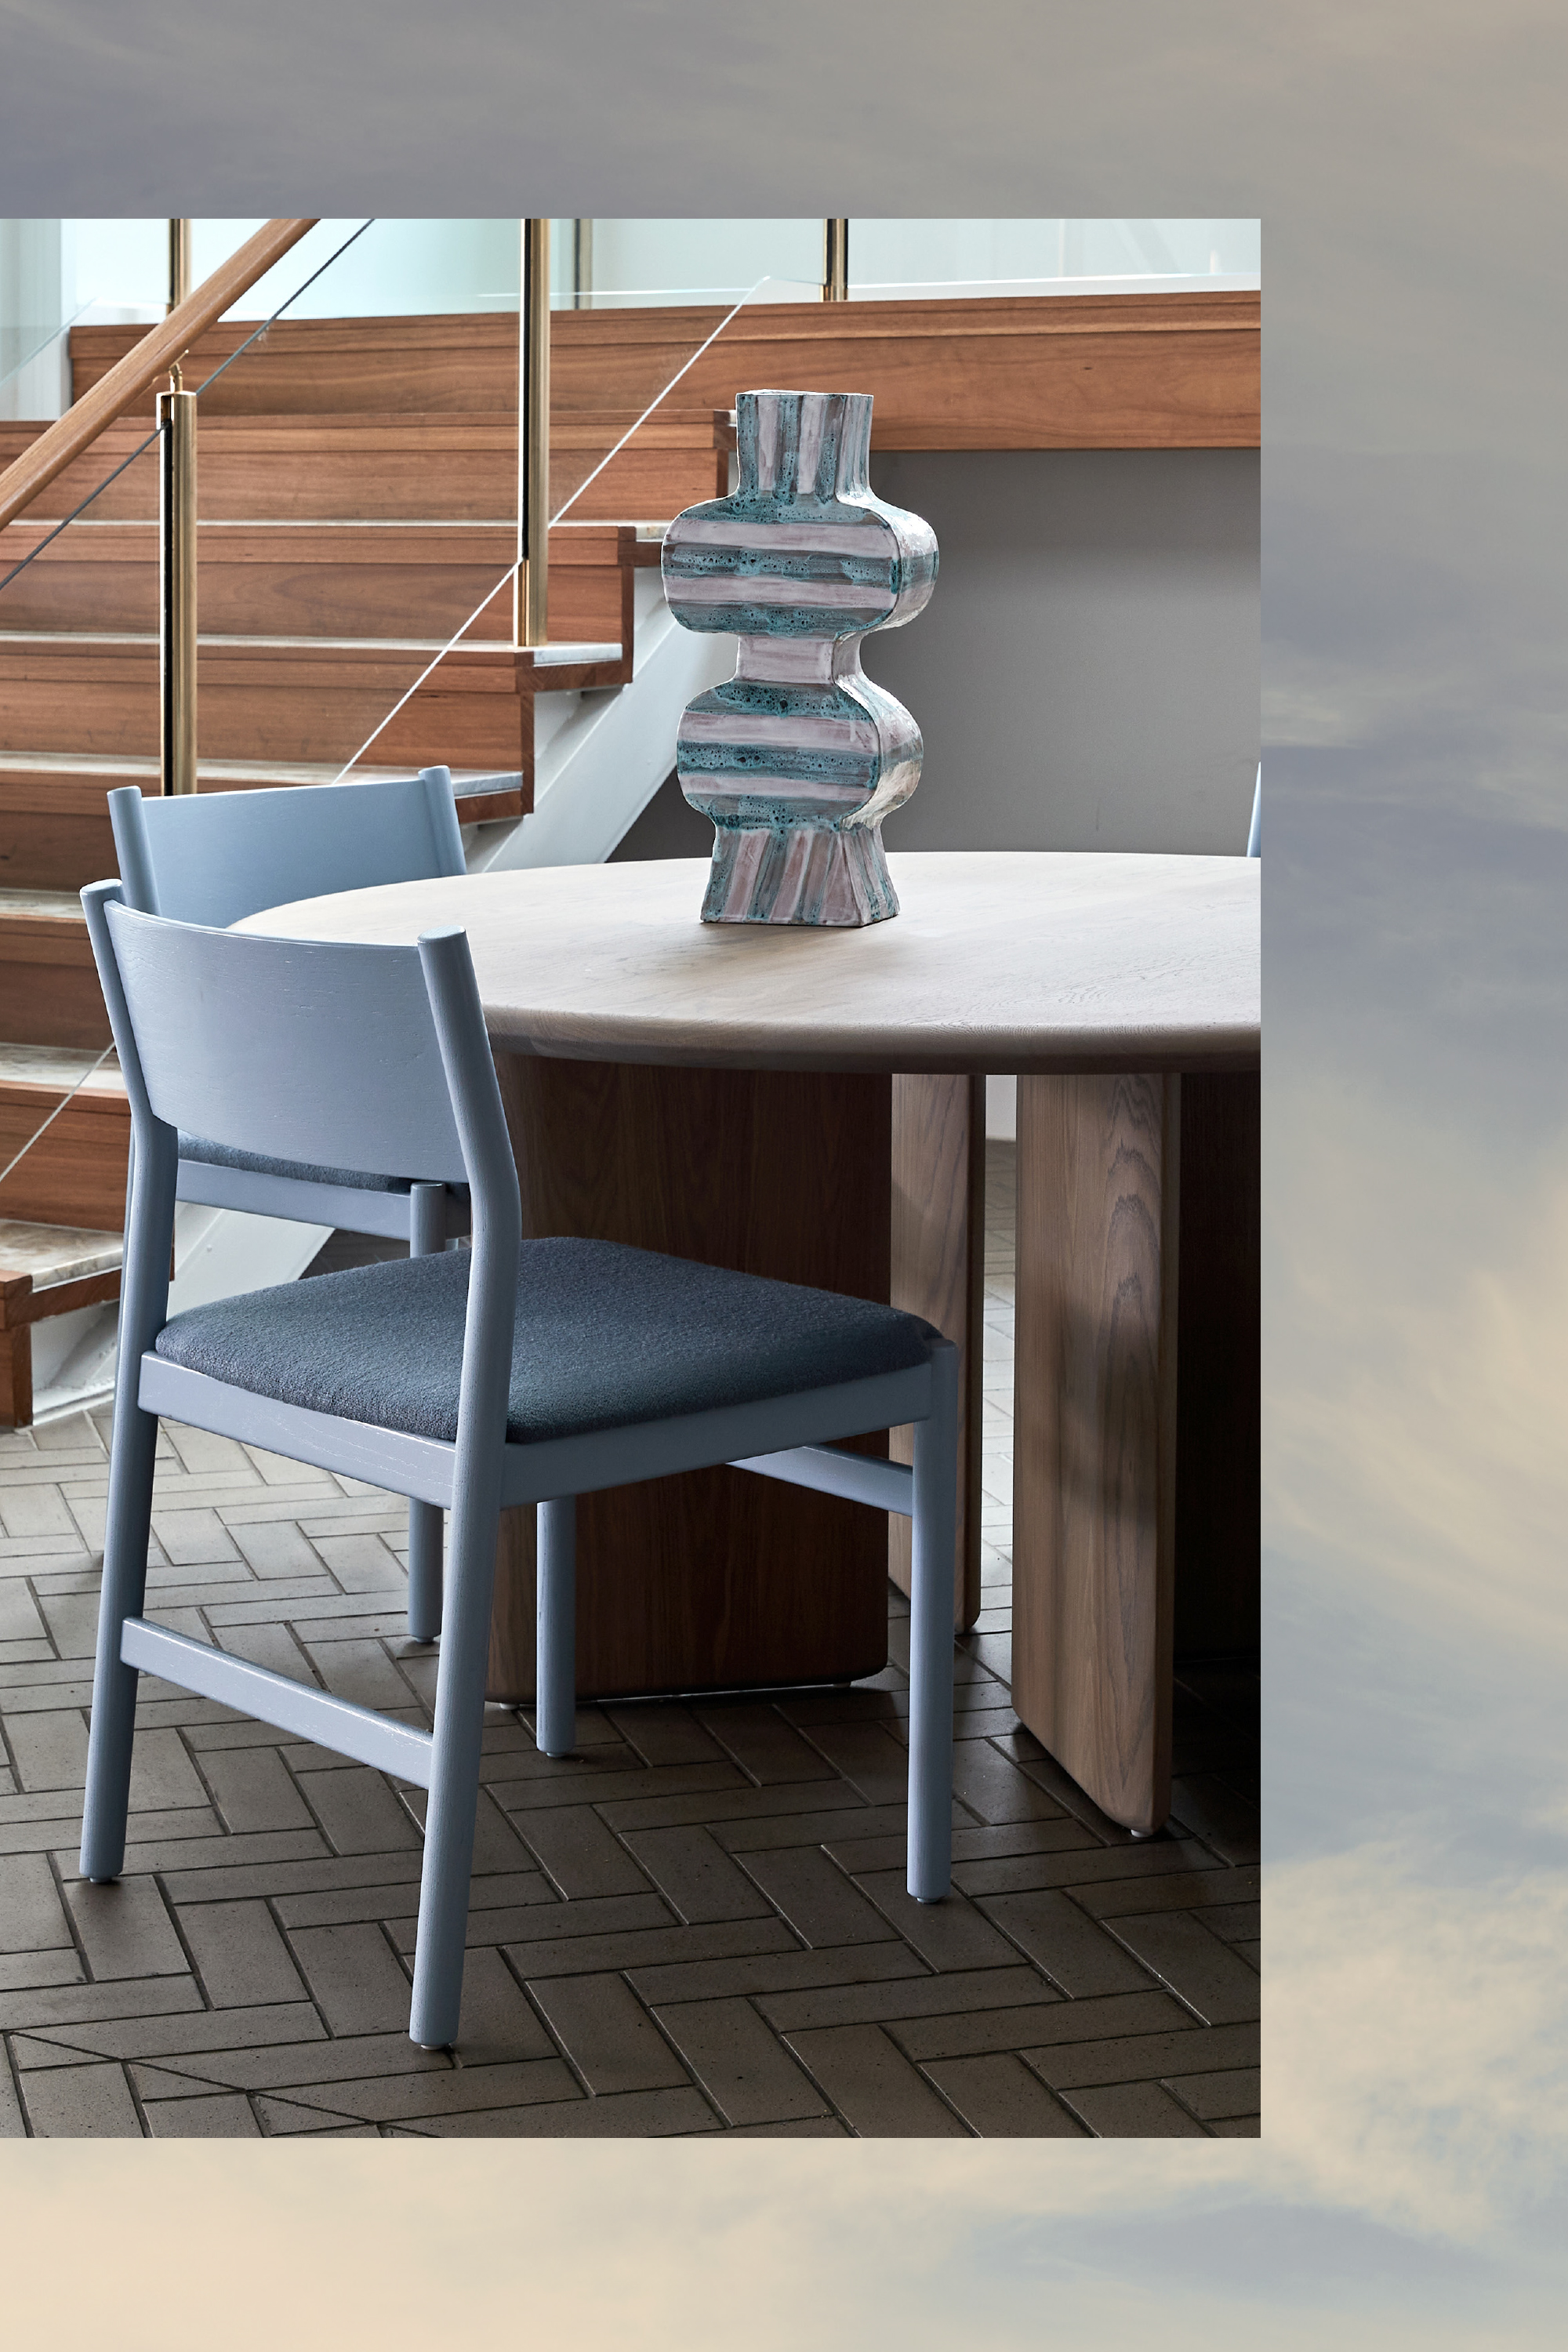 Gus dining chair, August dining table, Kitt side table